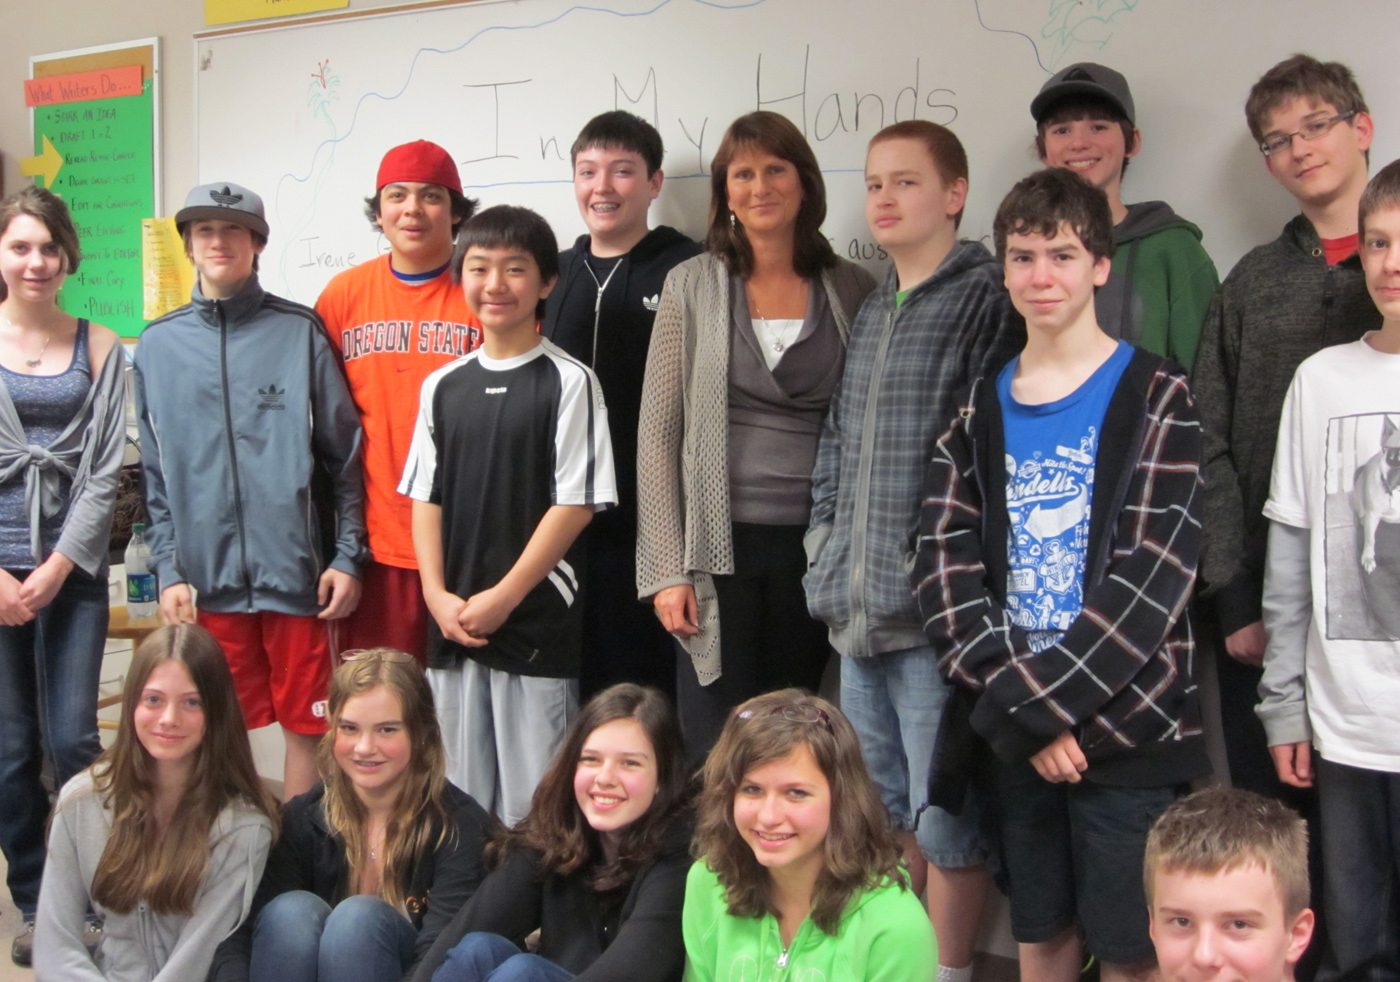 Marrion: Jeannie Smith, the daughter of a Polish Holocaust survivor, shared her mother's heroic story with seventh-and eighth-grade students at Cascadia Montessori Middle School on April 12.